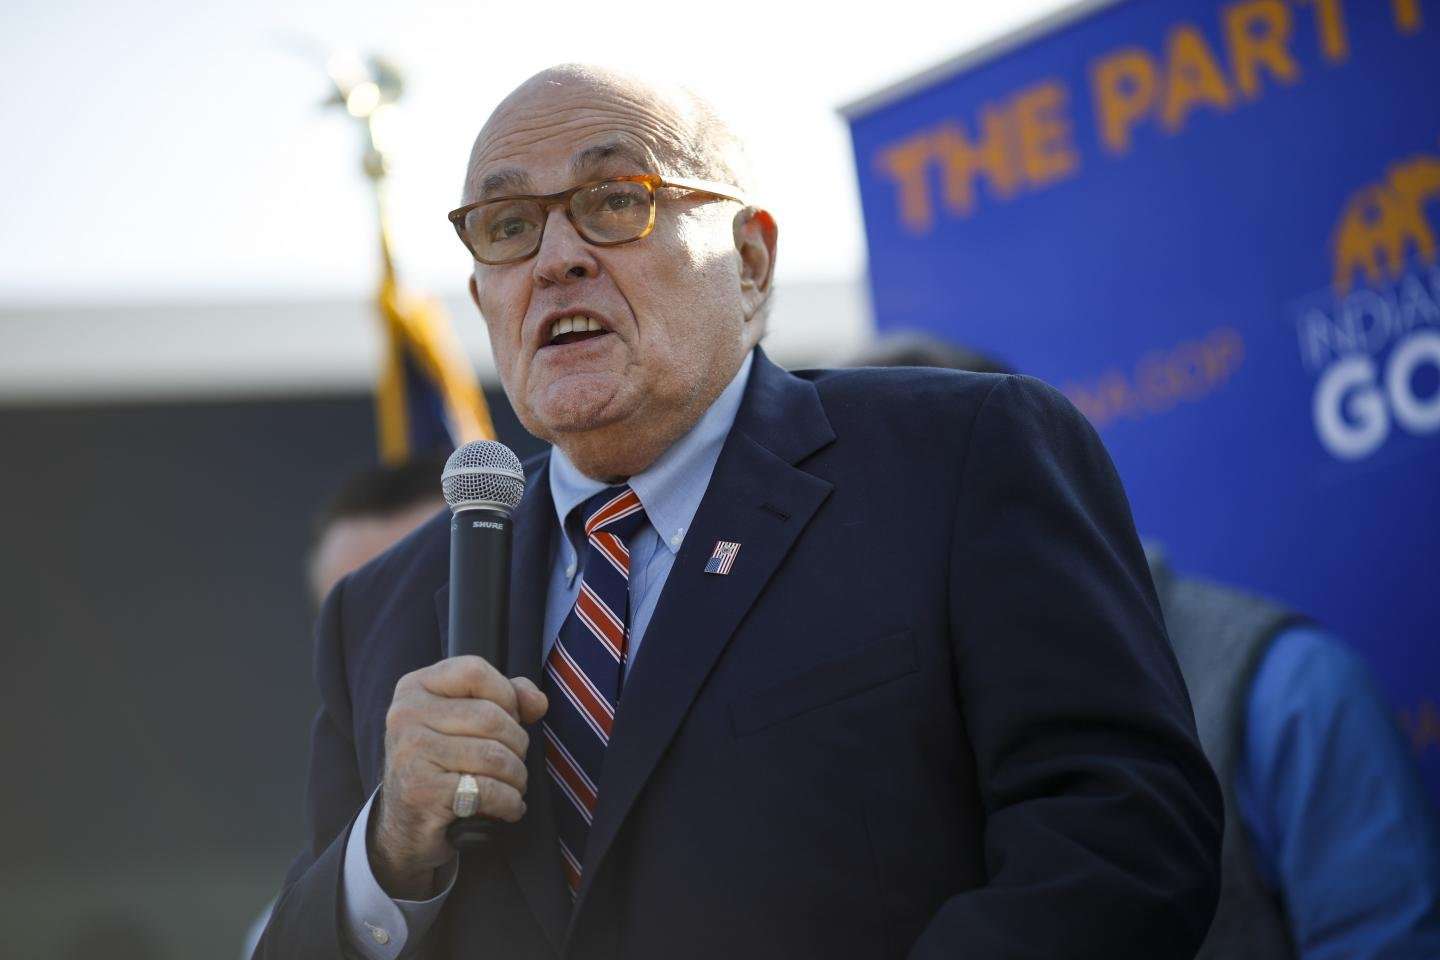 image for Trump Lawyer Rudy Giuliani Says Manafort 'Often' Shared Mueller Questions: Report